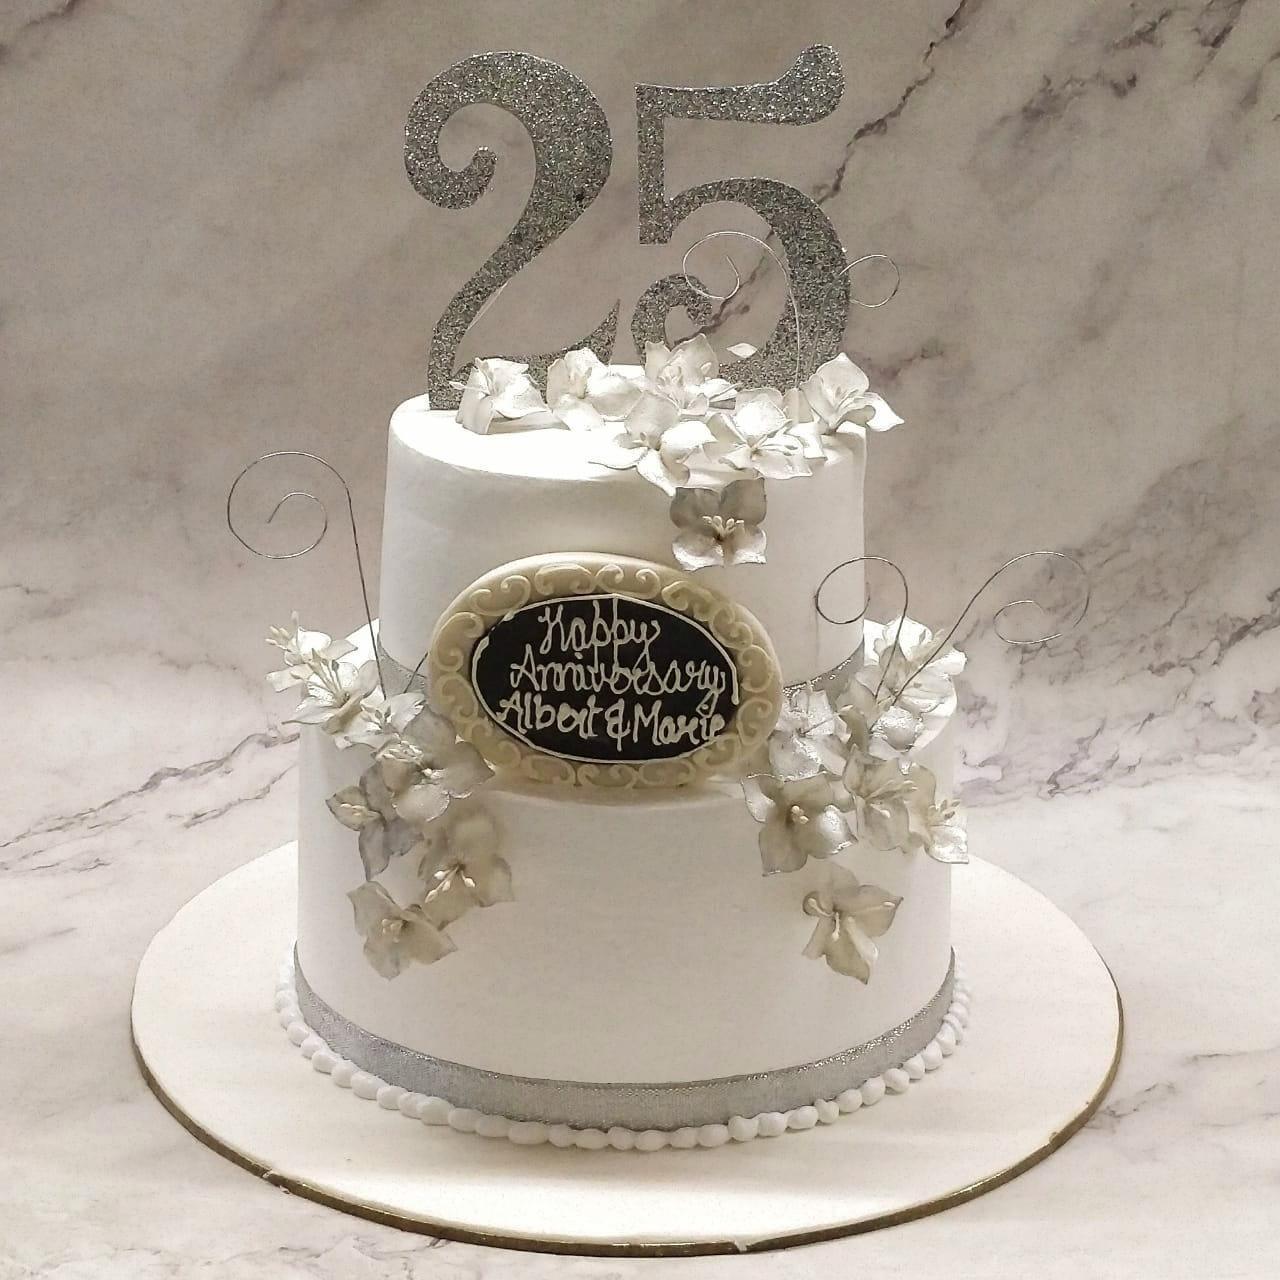 Incredible Compilation of Full 4K 25th Anniversary Cake Images: Over 999+ Astonishing Options!